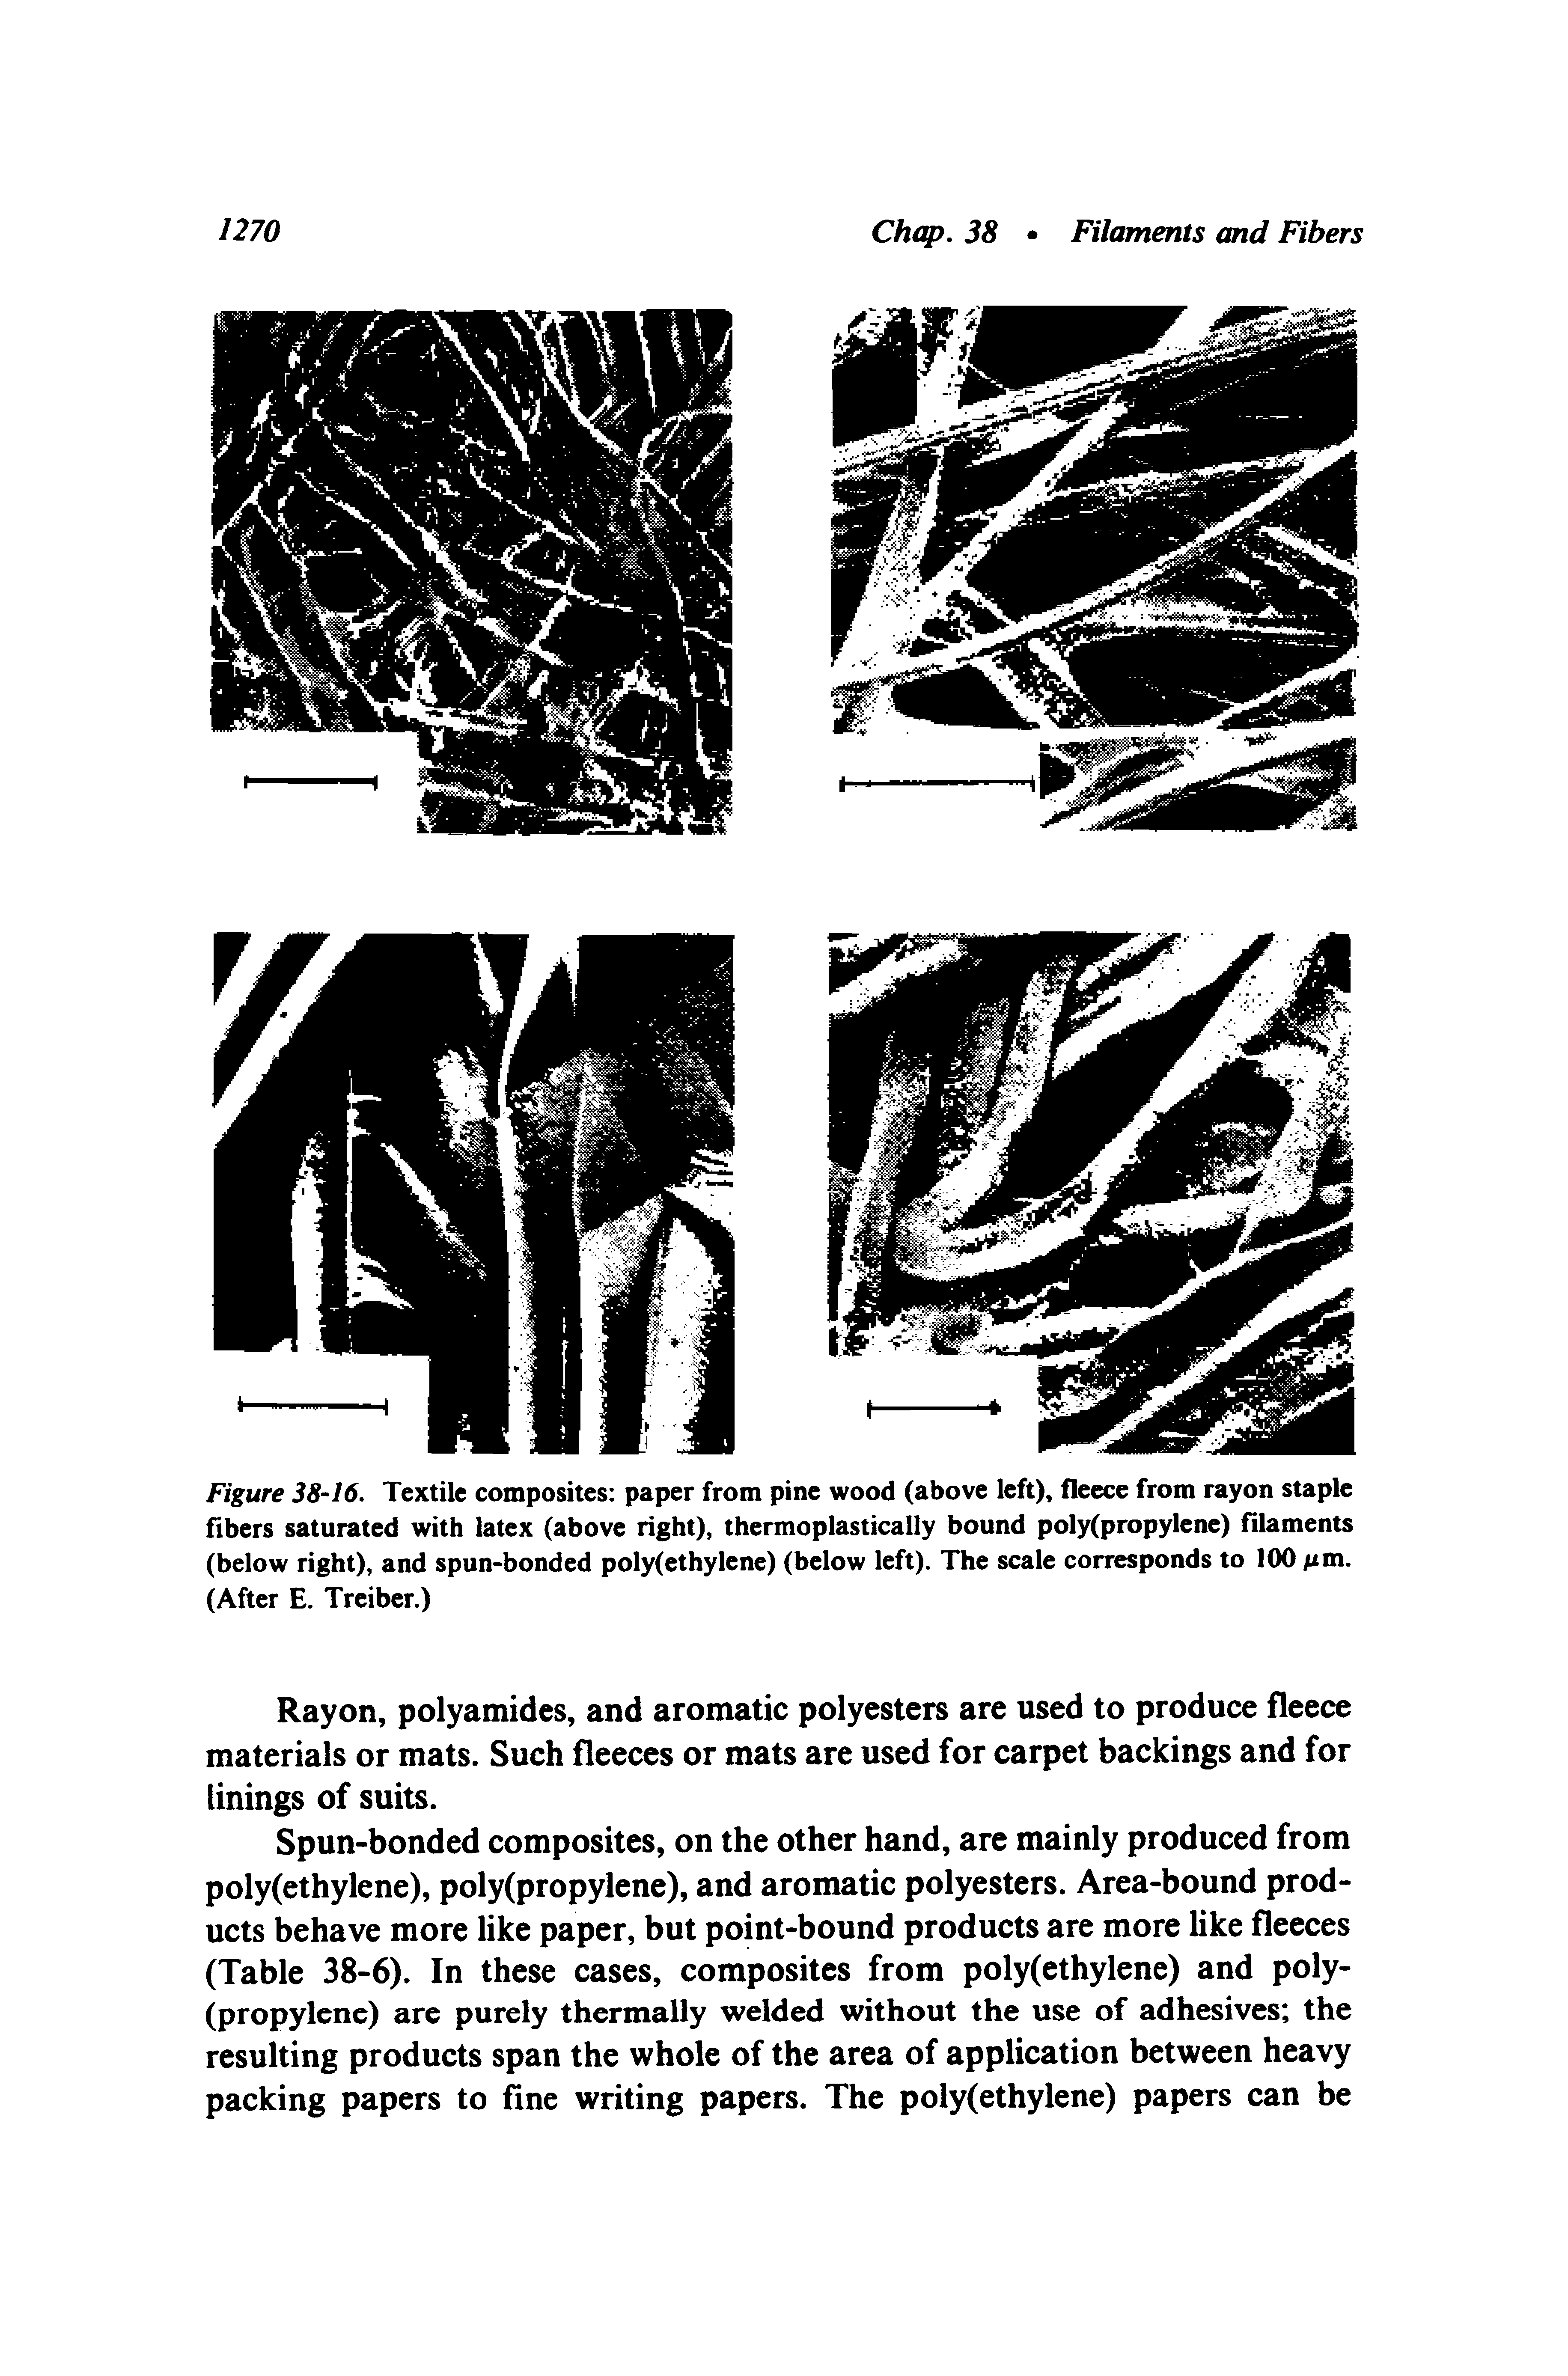 Figure 38-16. Textile composites paper from pine wood (above left), fleece from rayon staple fibers saturated with latex (above right), thermoplastically bound poly(propylene) filaments (below right), and spun-bonded poly(ethylene) (below left). The scale corresponds to 100 Acm. (After E. Trciber.)...